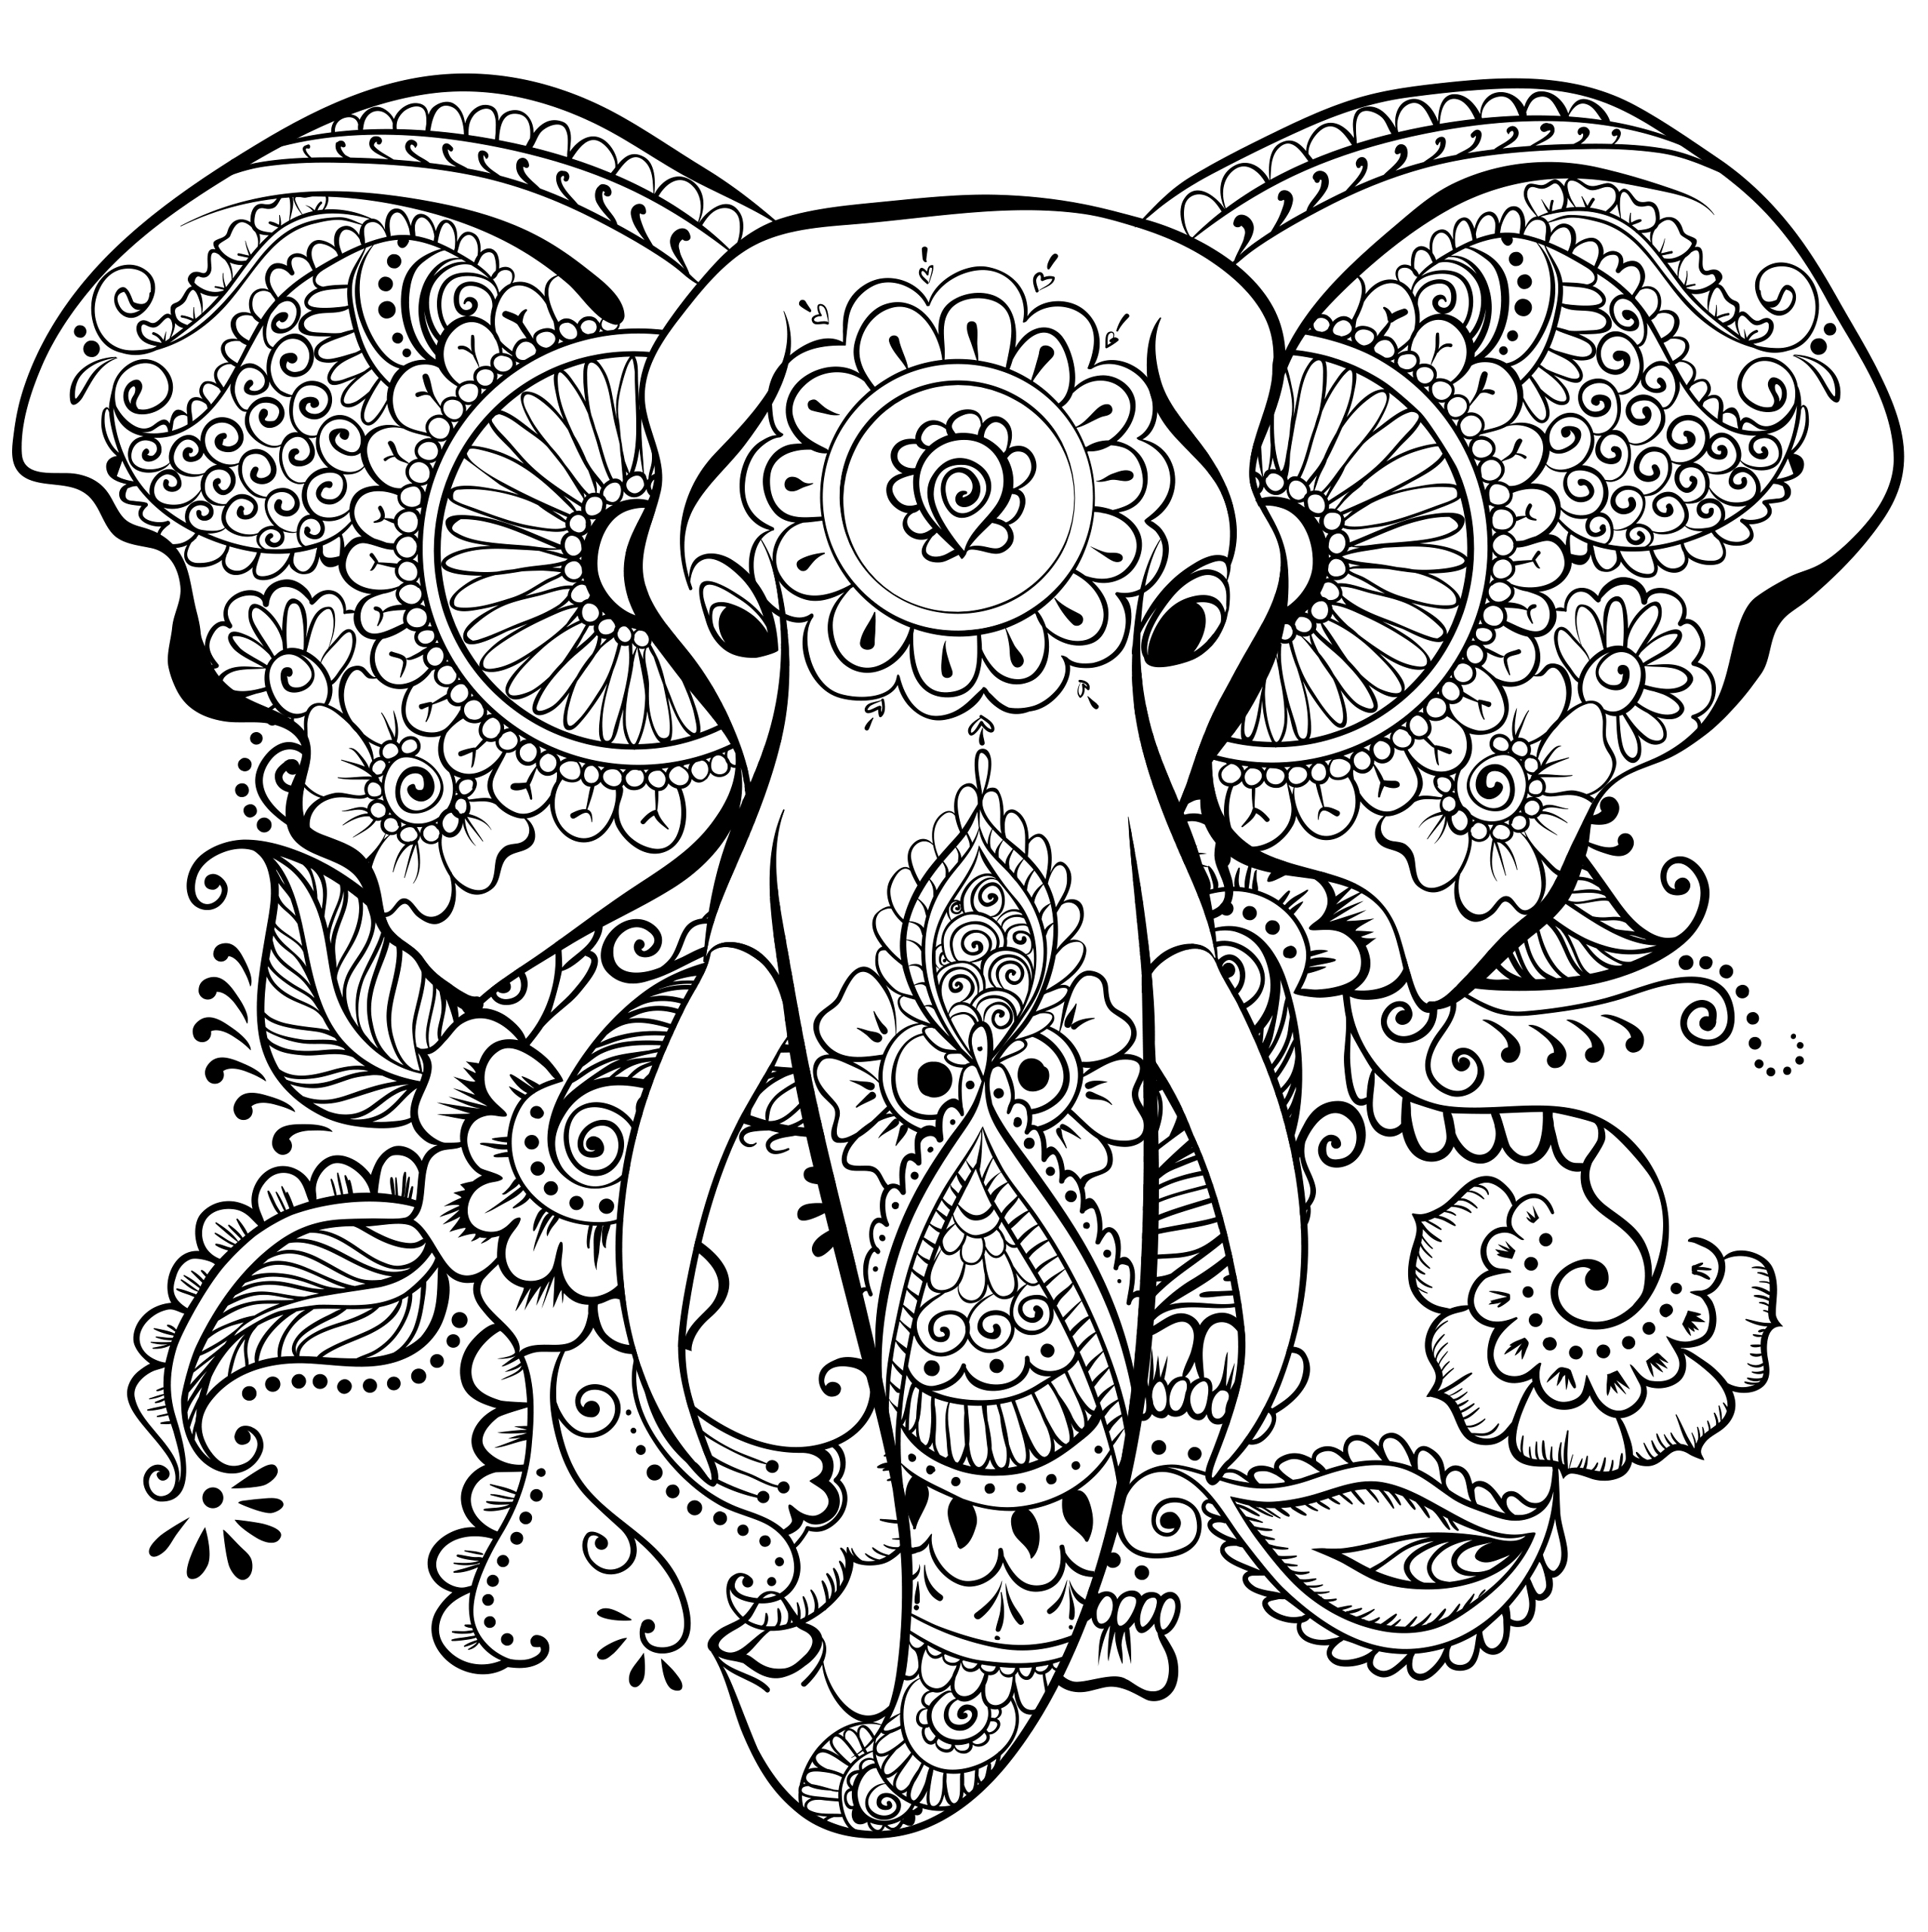 Download 63 Adult Coloring Pages To Nourish Your Mental - Visual ...